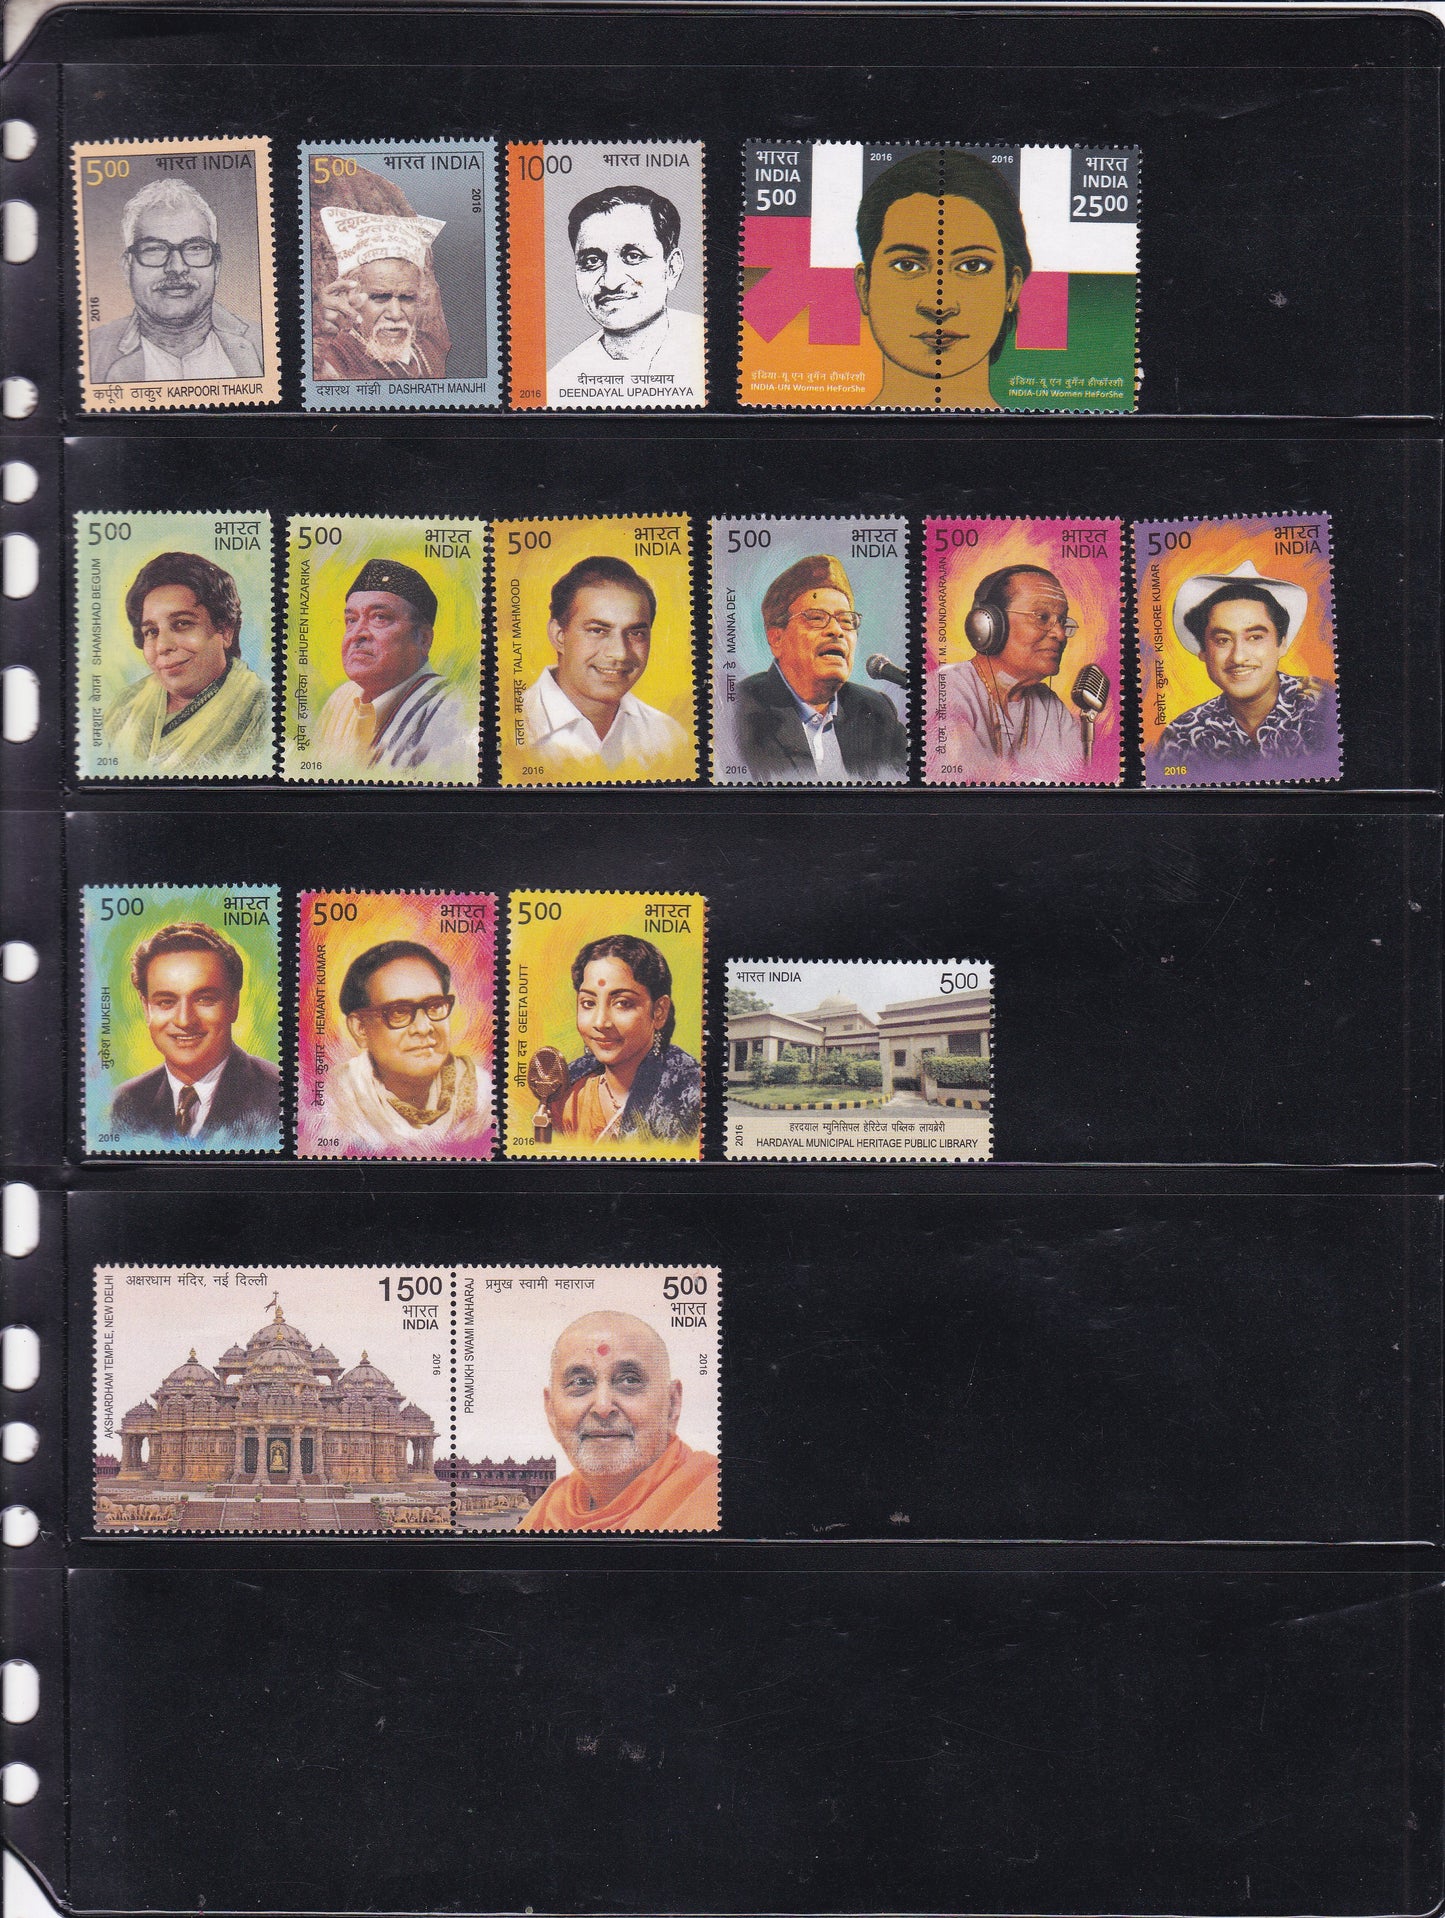 India-2016 Full Year pack MNH Stamps.